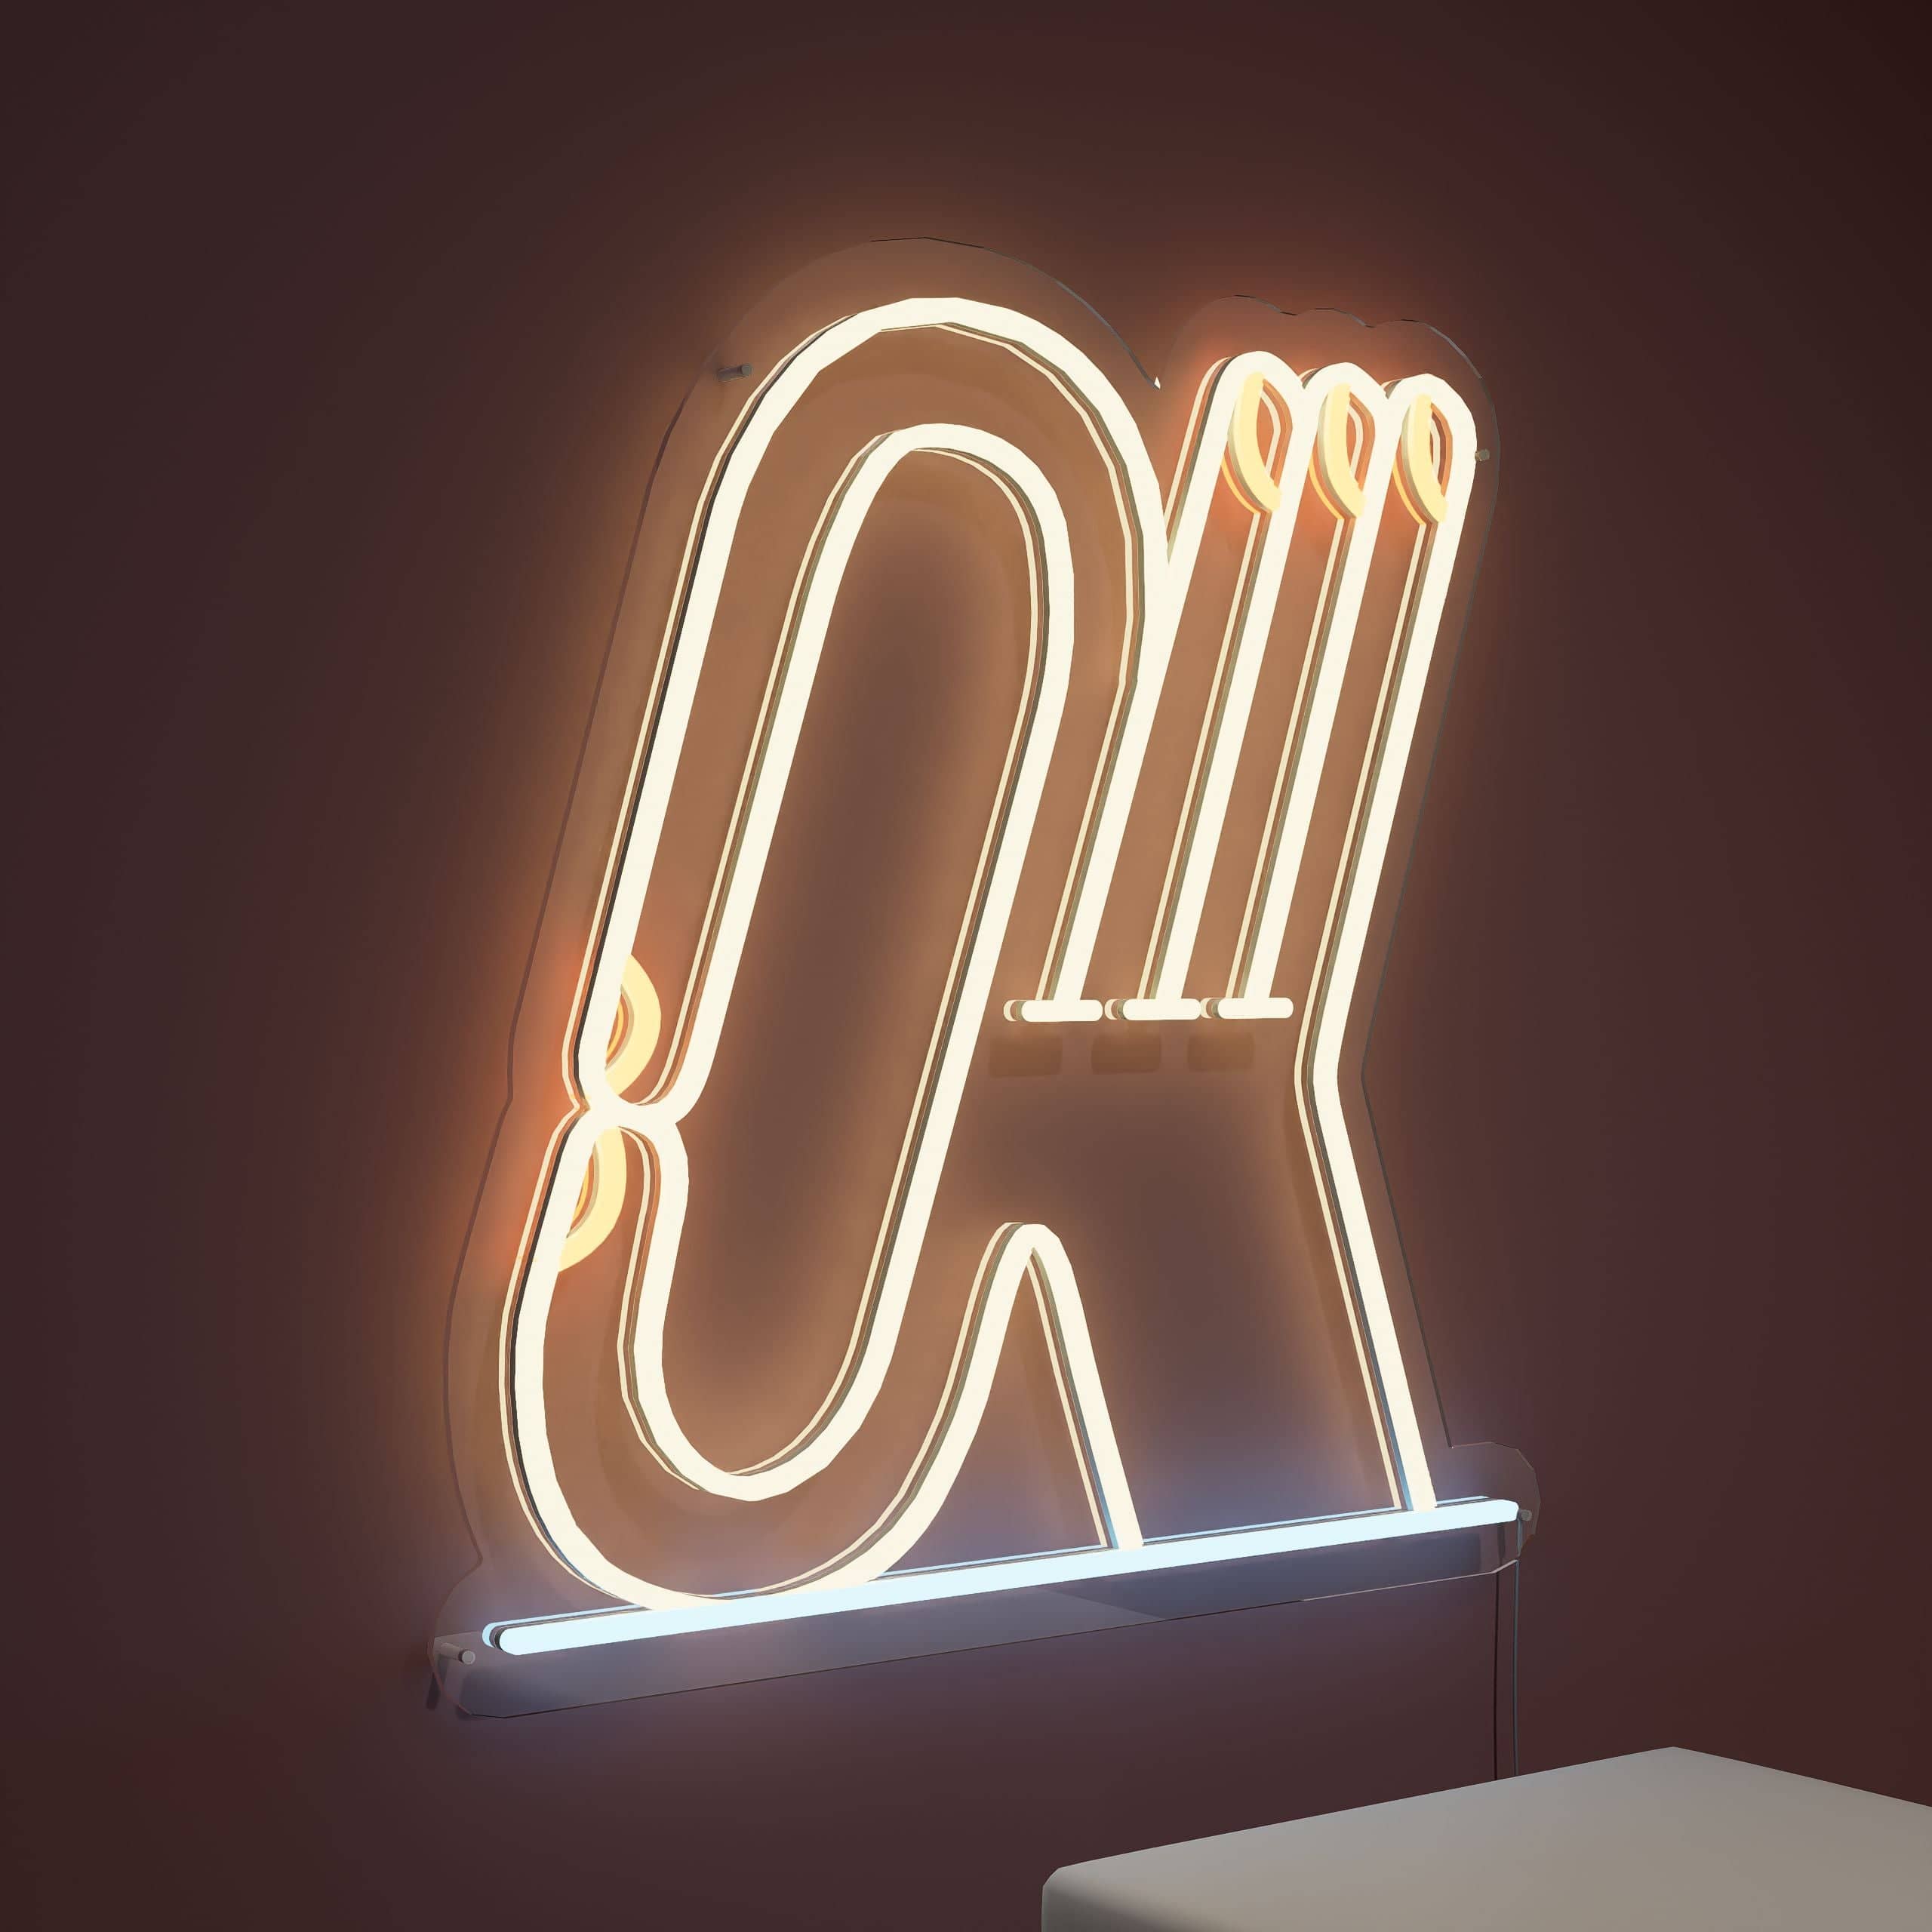 Awesome neon signs add glow to home decor